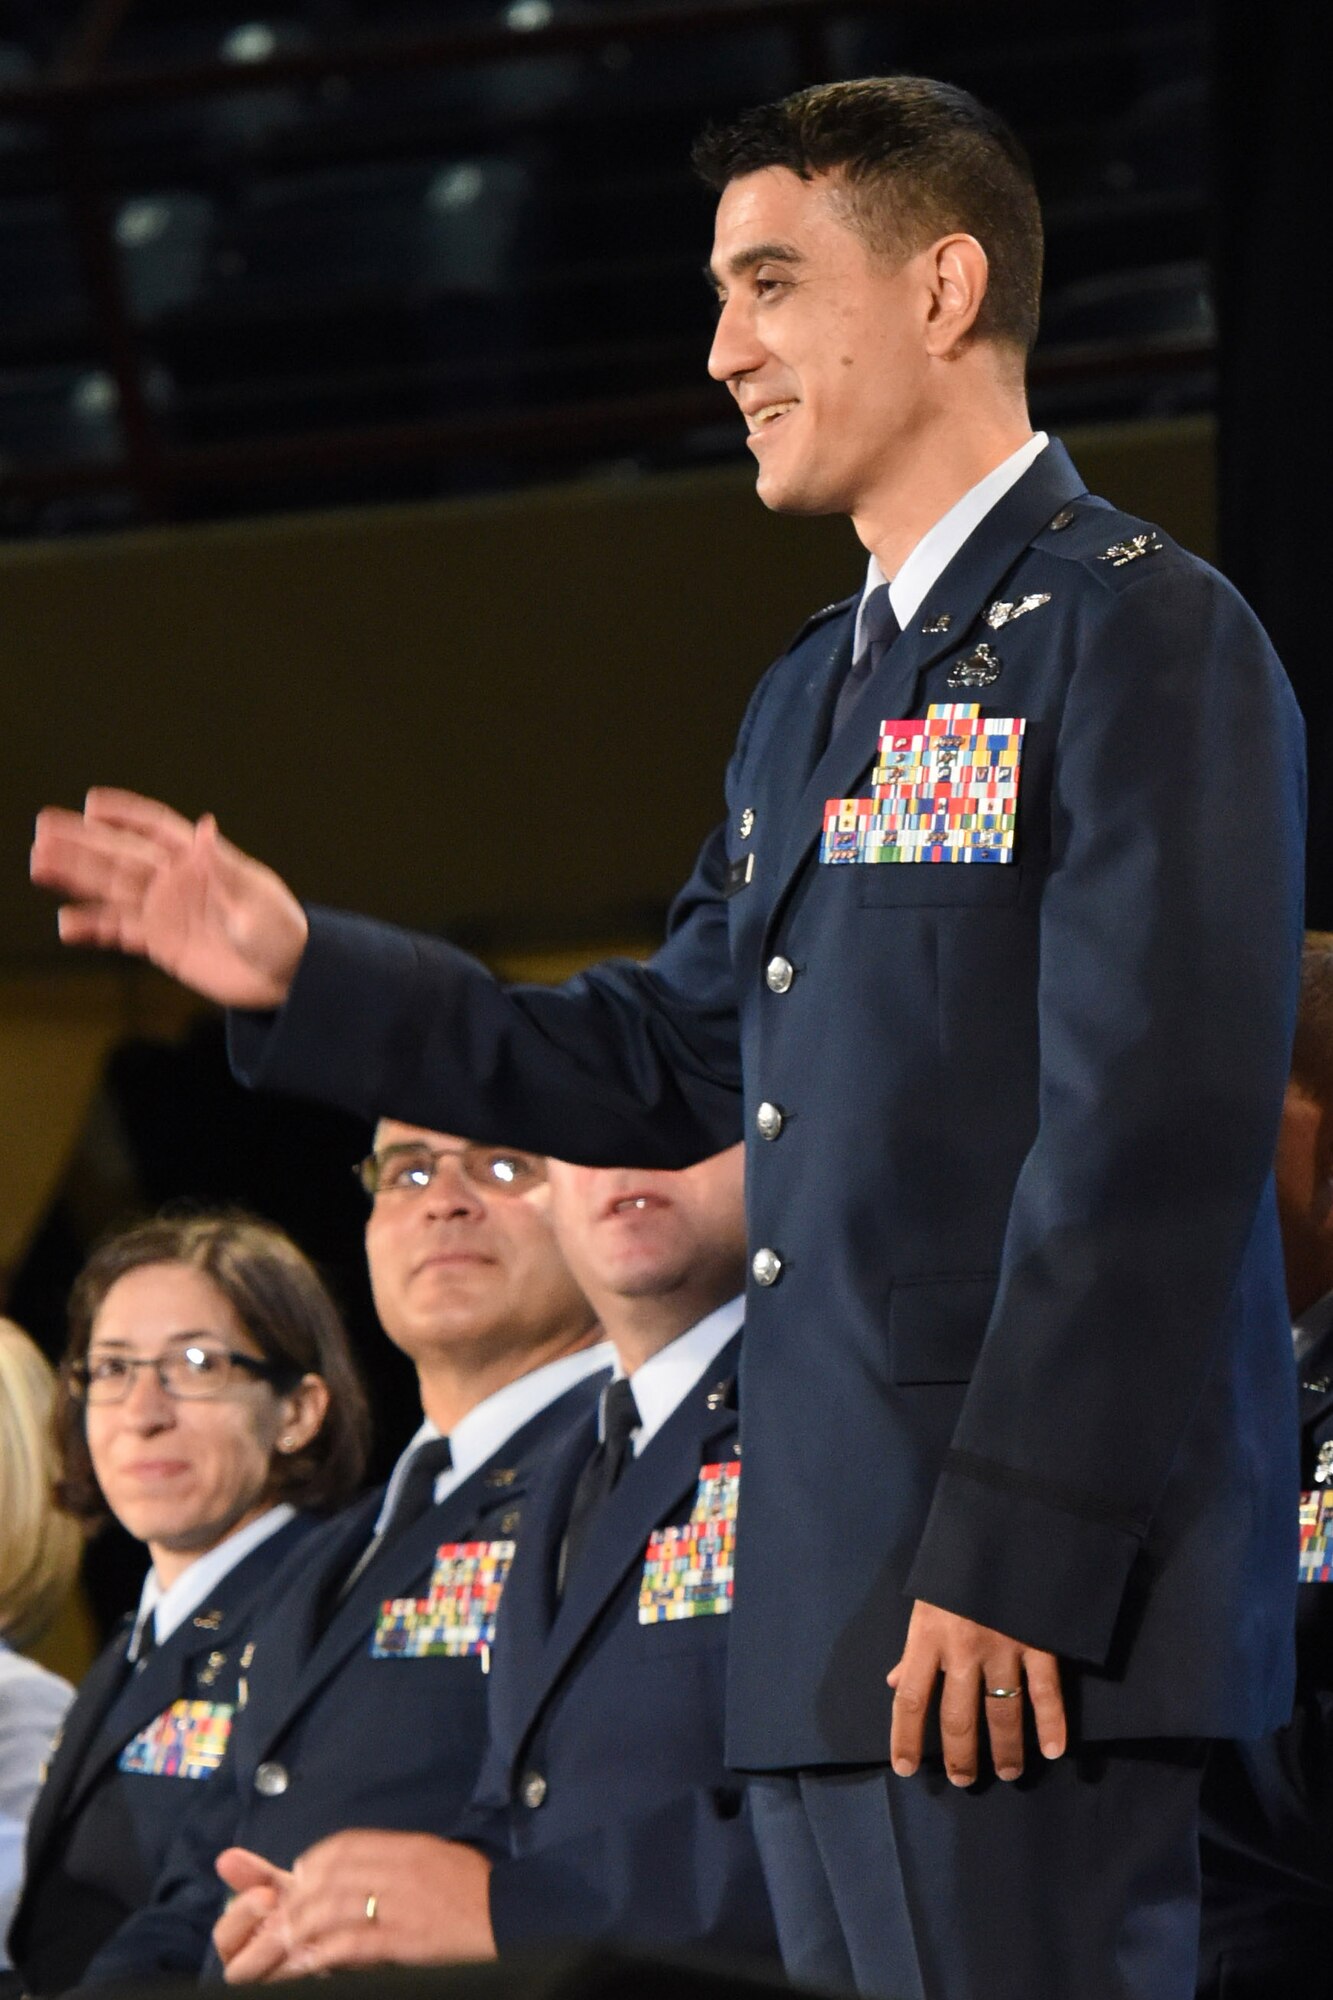 U.S. Air Force Col. Ricky Mills, 17th Training Wing commander, stands for recognition during the annual convocation of the San Angelo Independent School District at the Foster Communications Colosseum, San Angelo, Texas, Aug. 15, 2017.